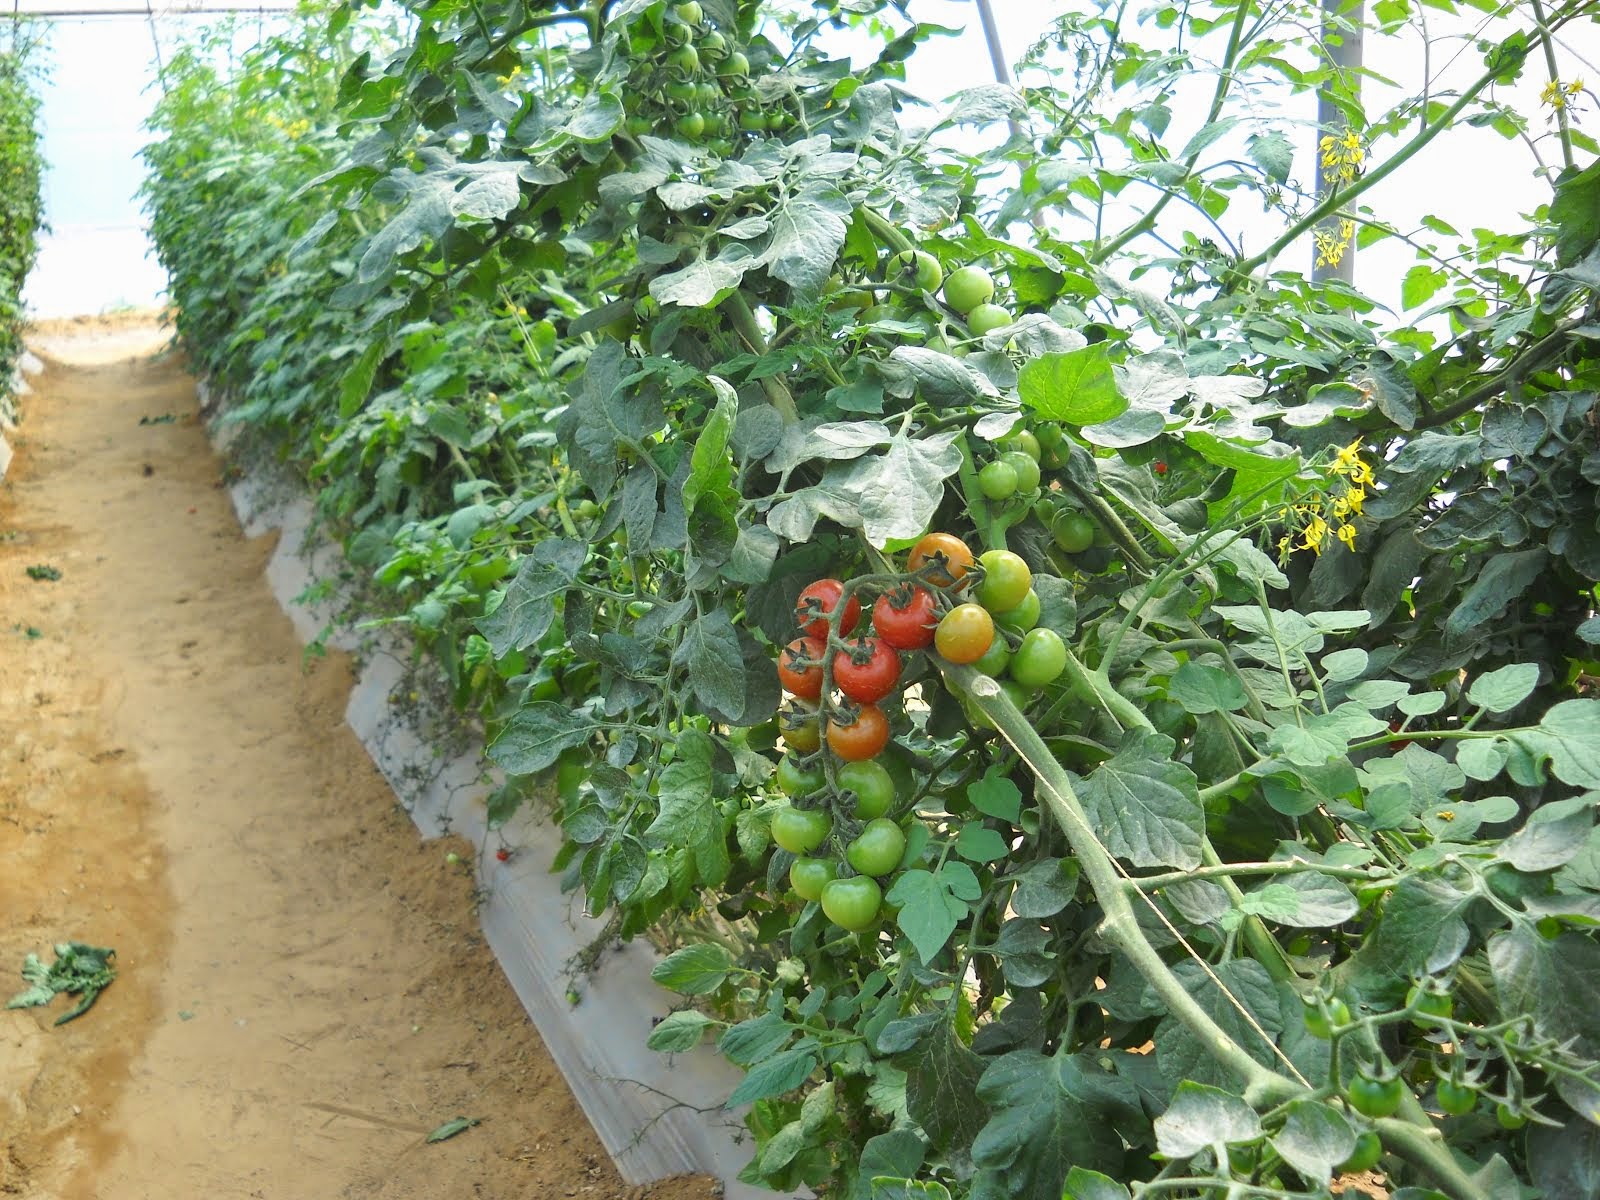 FILED BY GREEN HOUSE CHERRY TOMATO